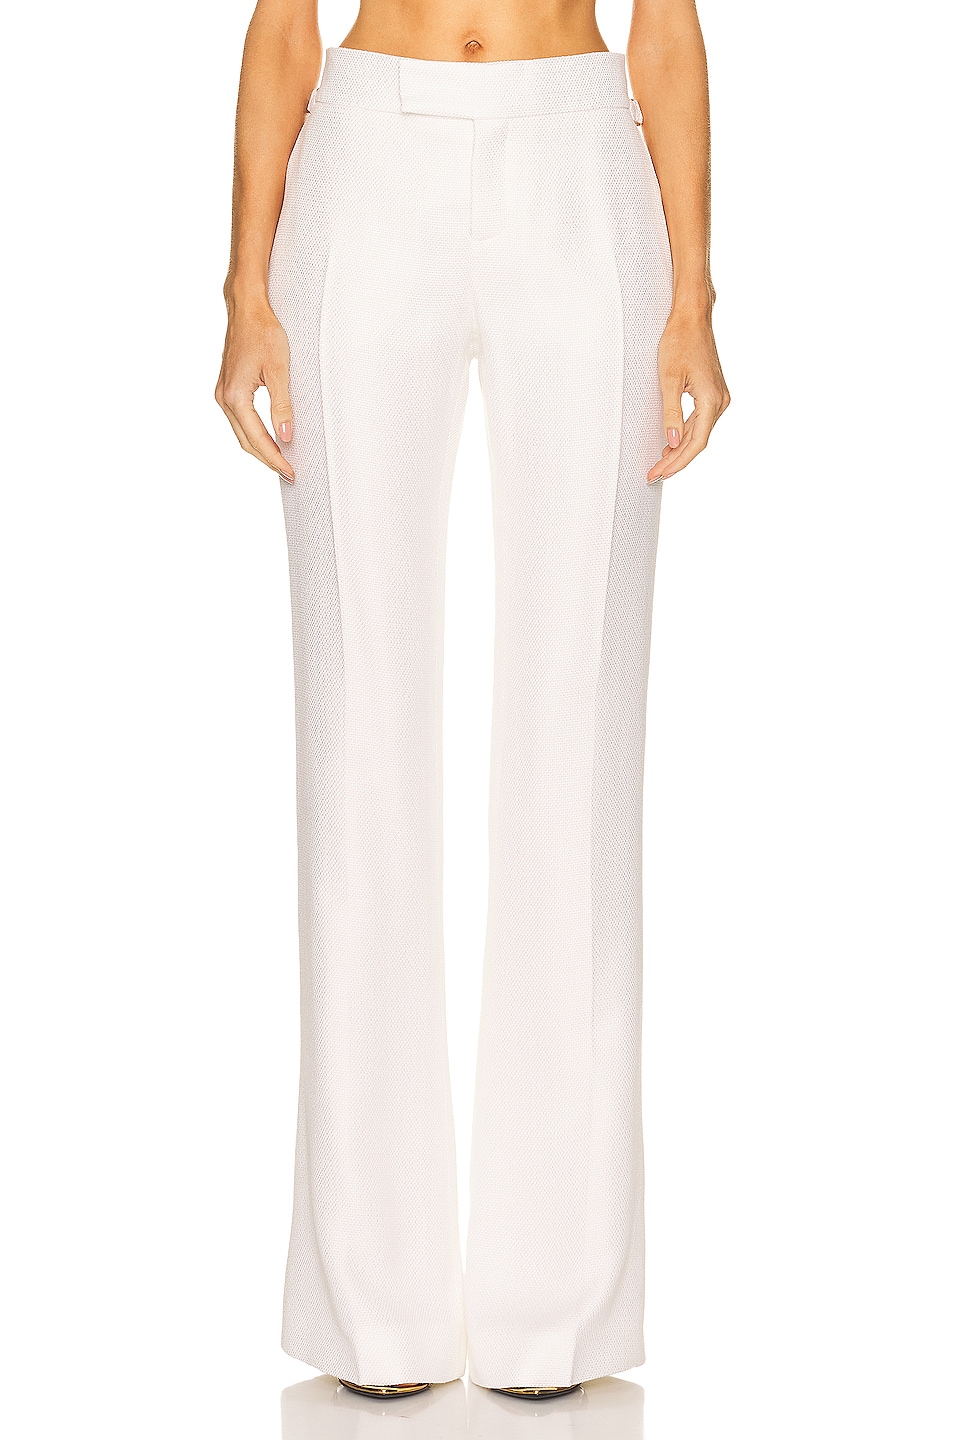 TOM FORD Hopsack Tailored Flare Pant in Chalk | FWRD